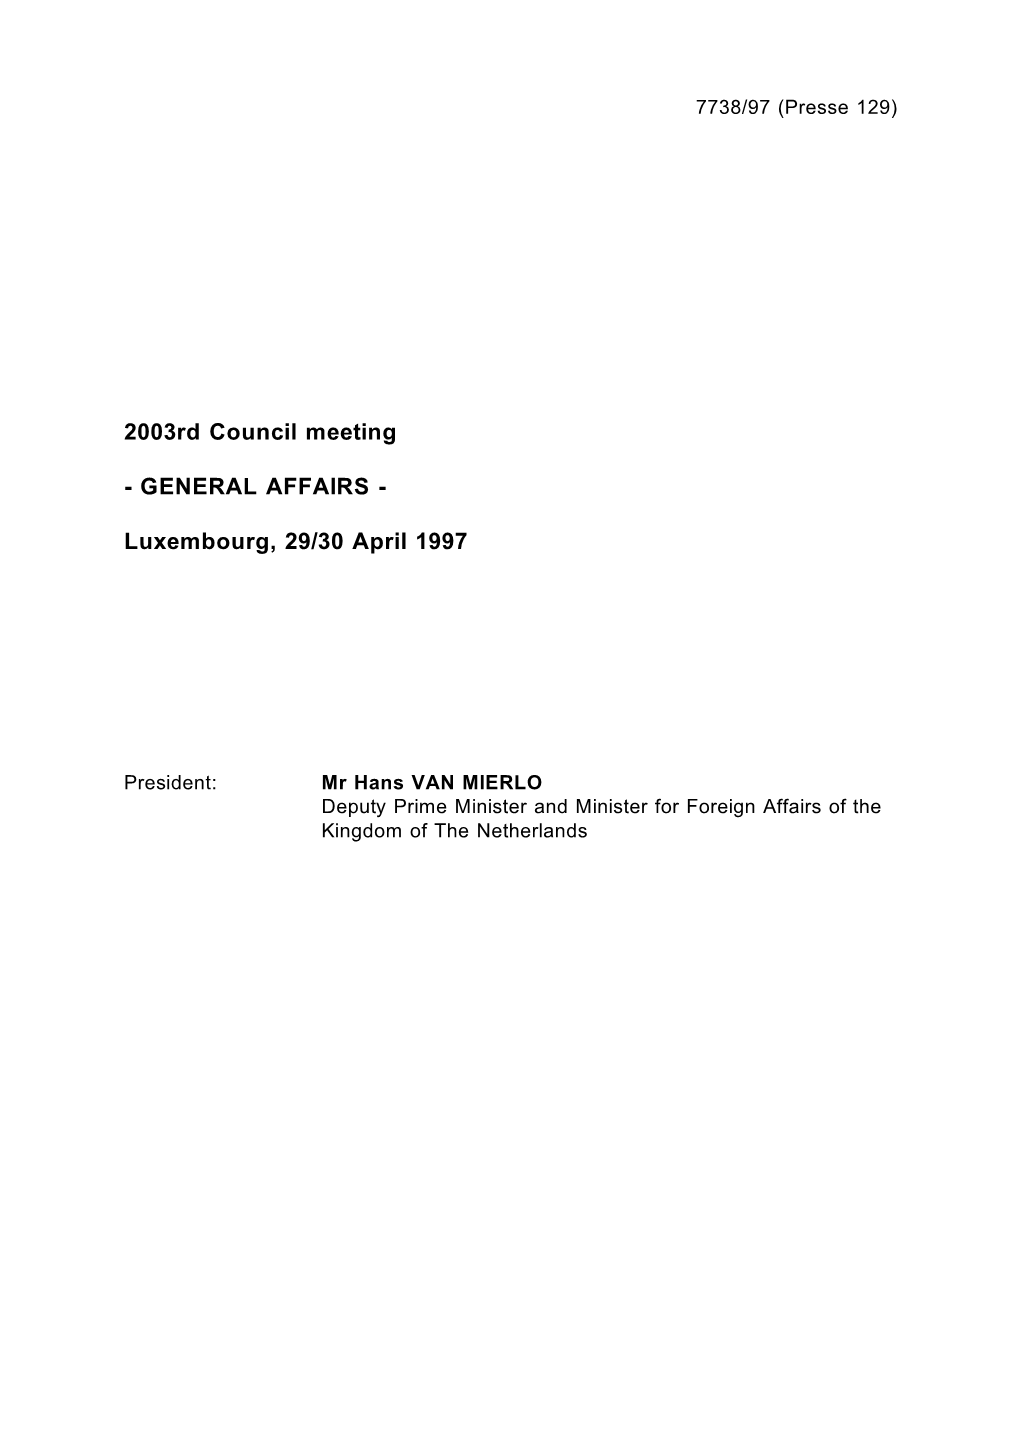 2003Rd Council Meeting